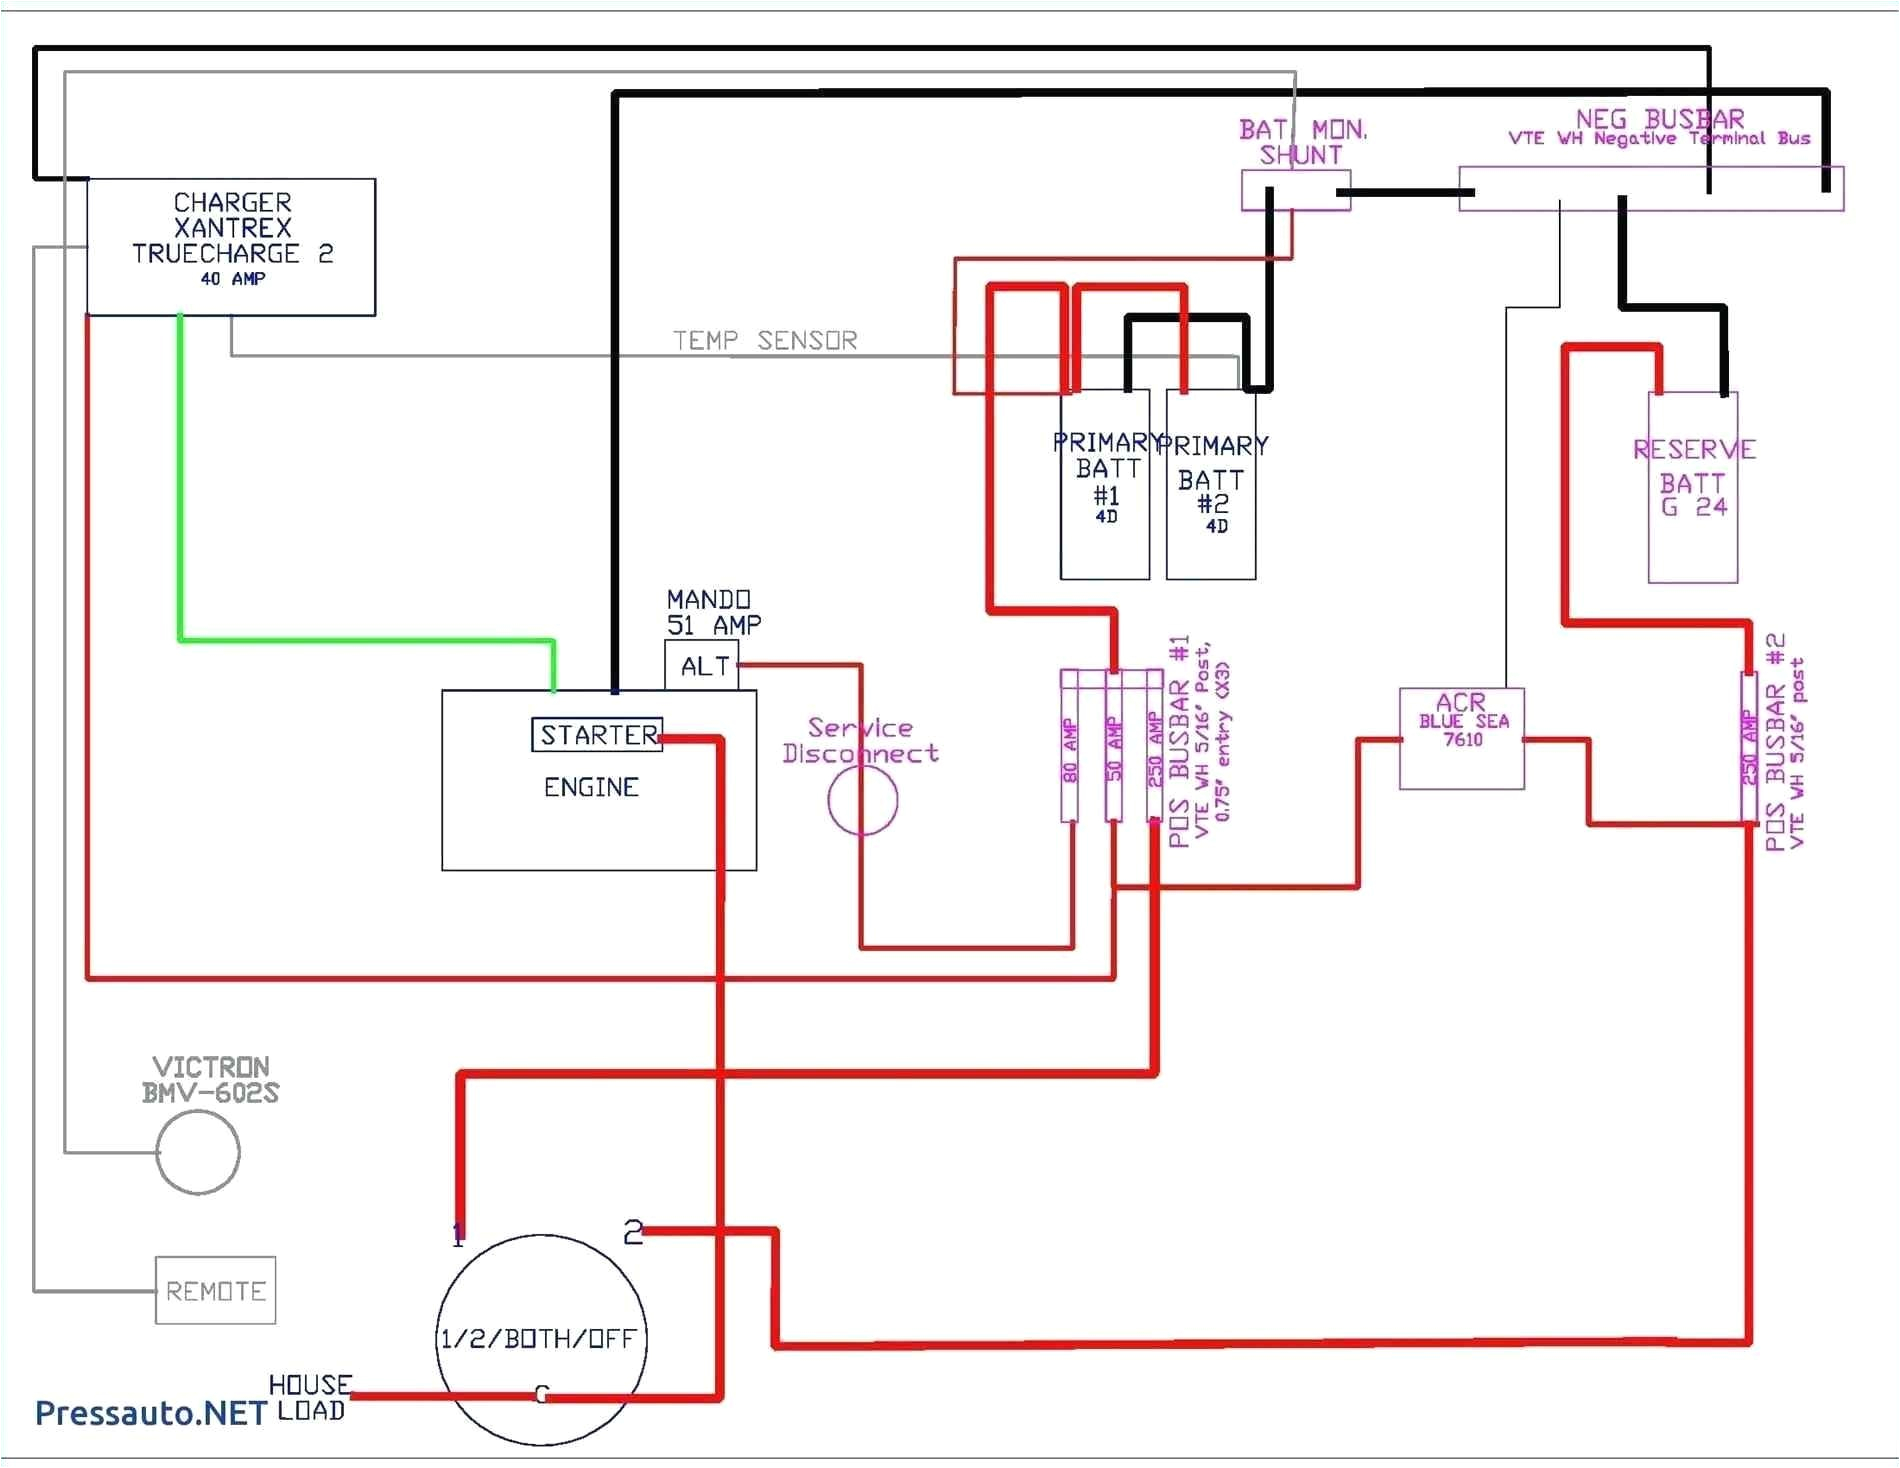 electrical schematic wiring color wiring diagram postschematic wiring colors wiring diagram post electrical schematic wiring color